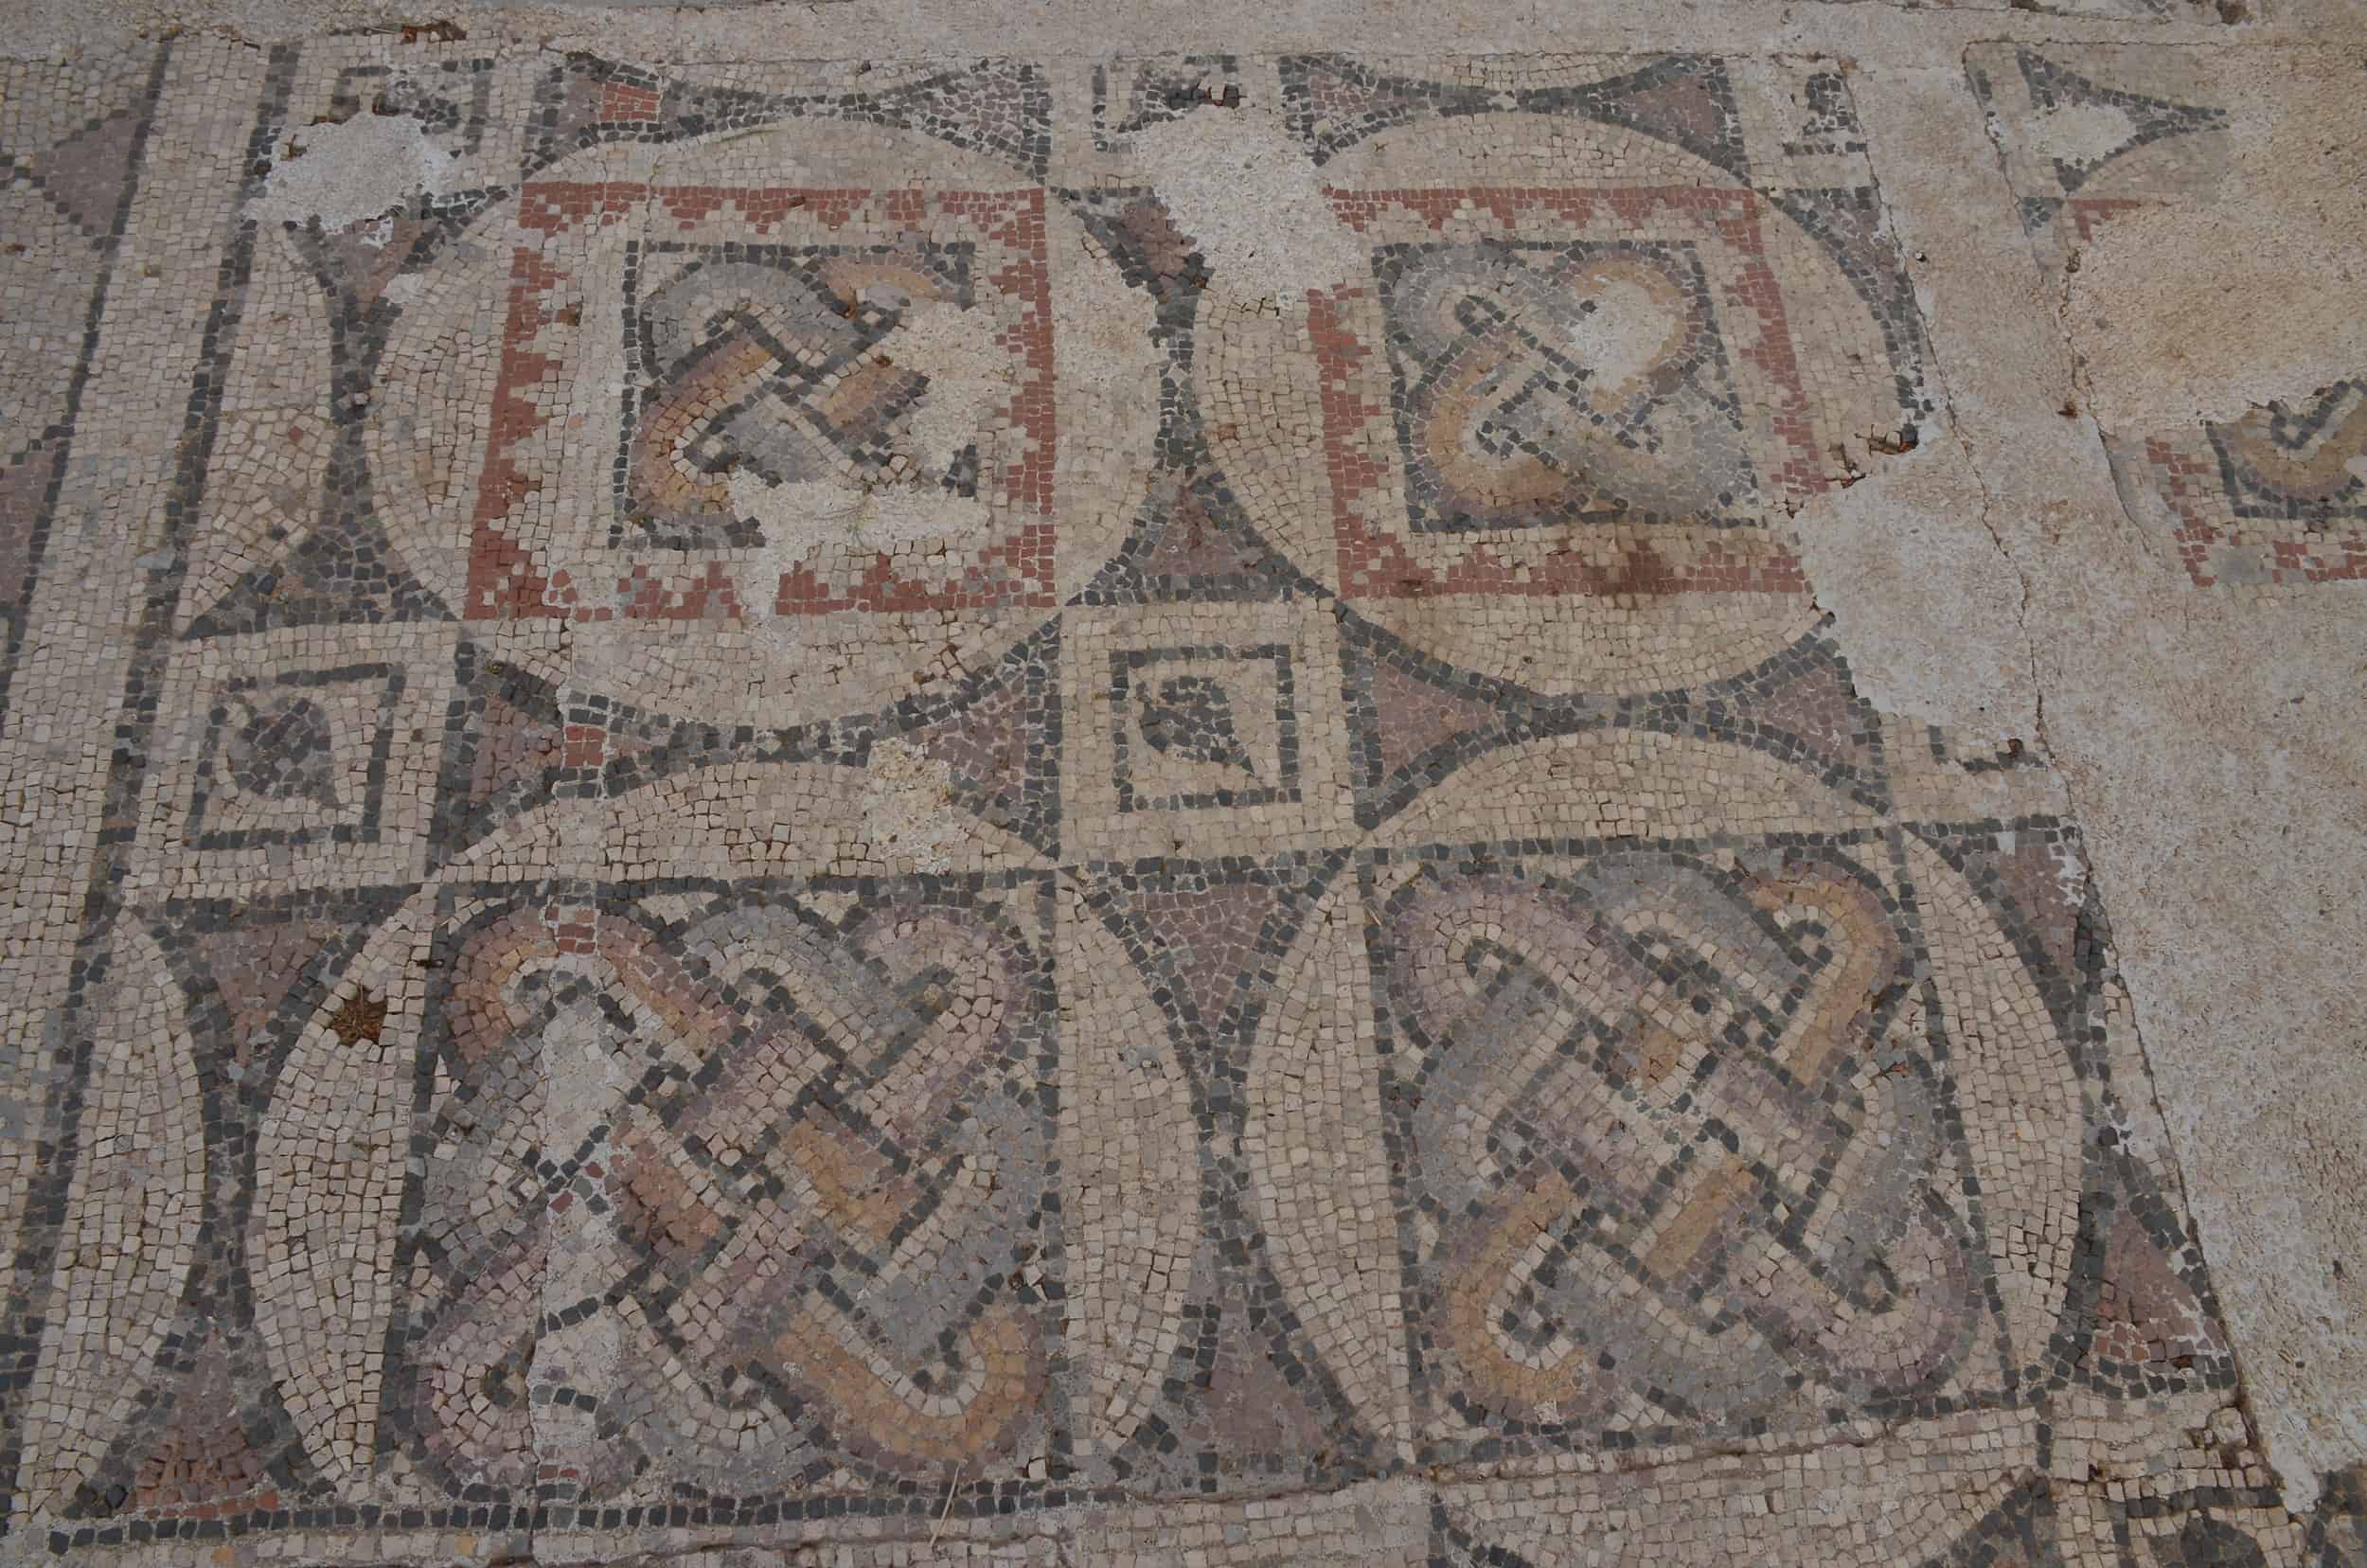 Mosaic floor in the main hall of the Sardis Synagogue